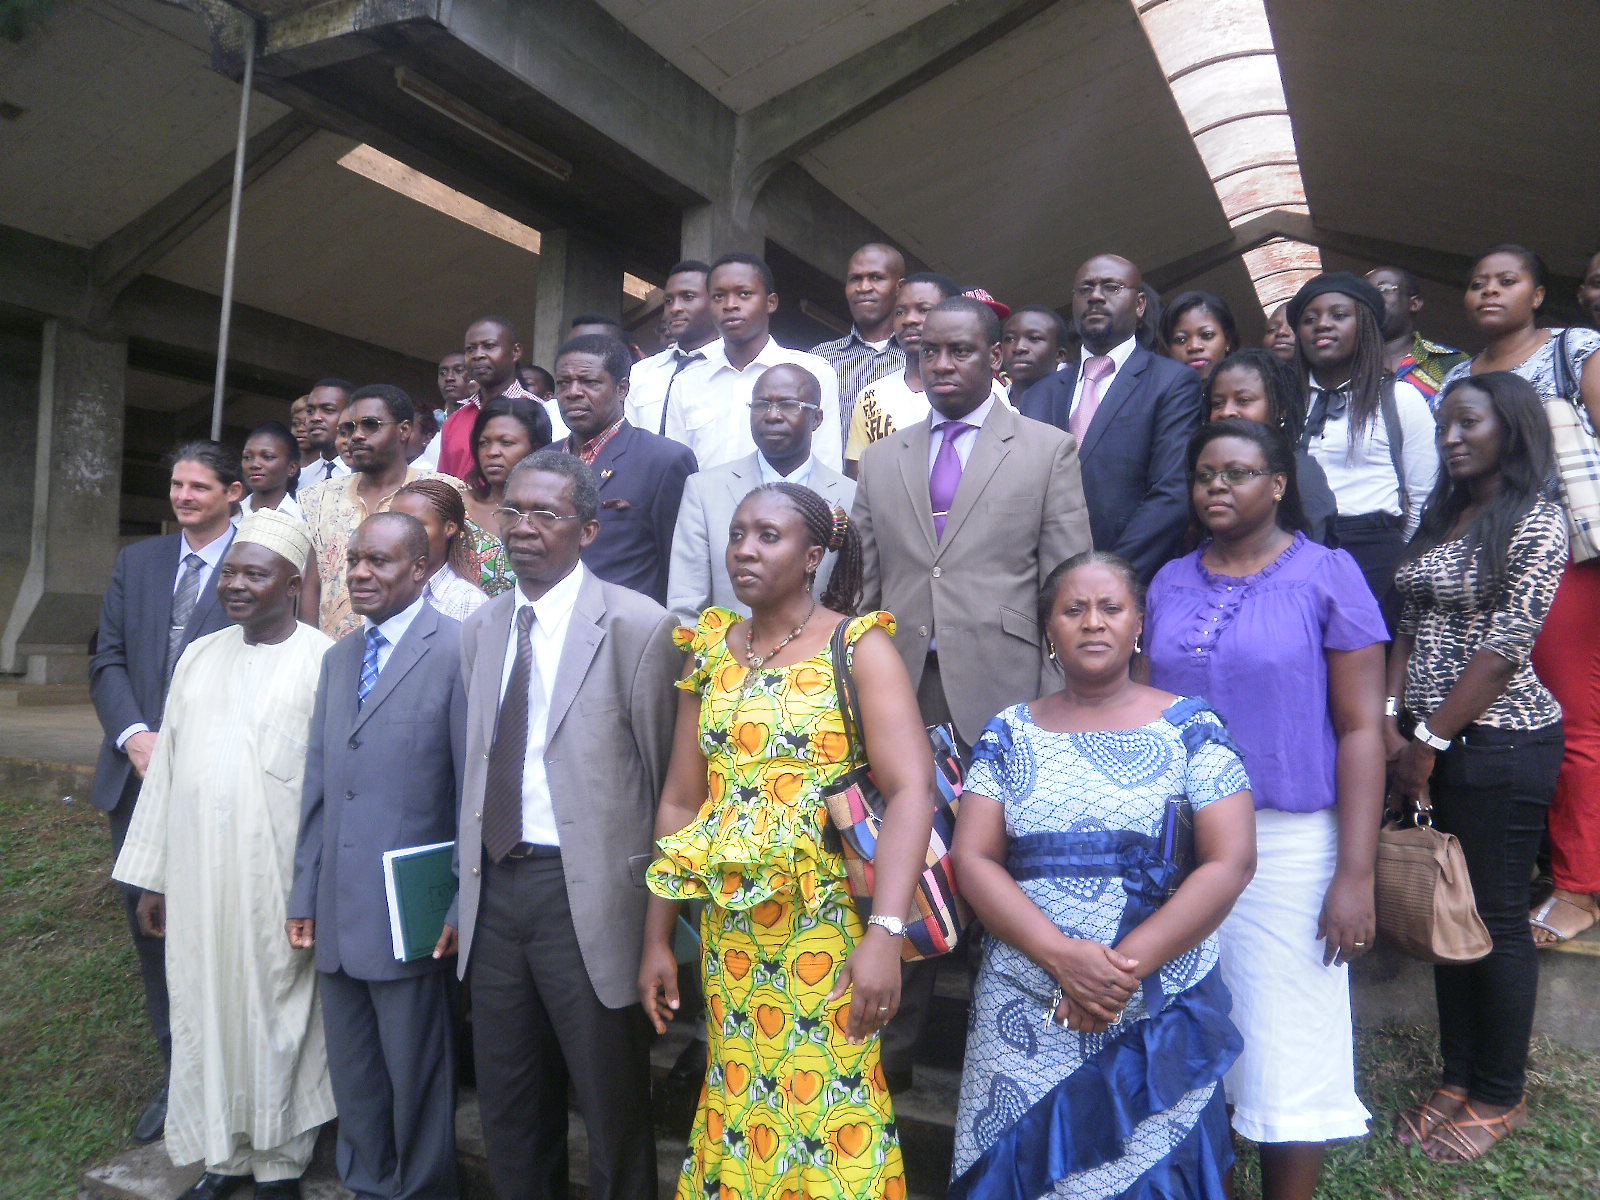 A family photo to close the intellectual discuss on International Francophonie Day 2014 in UB